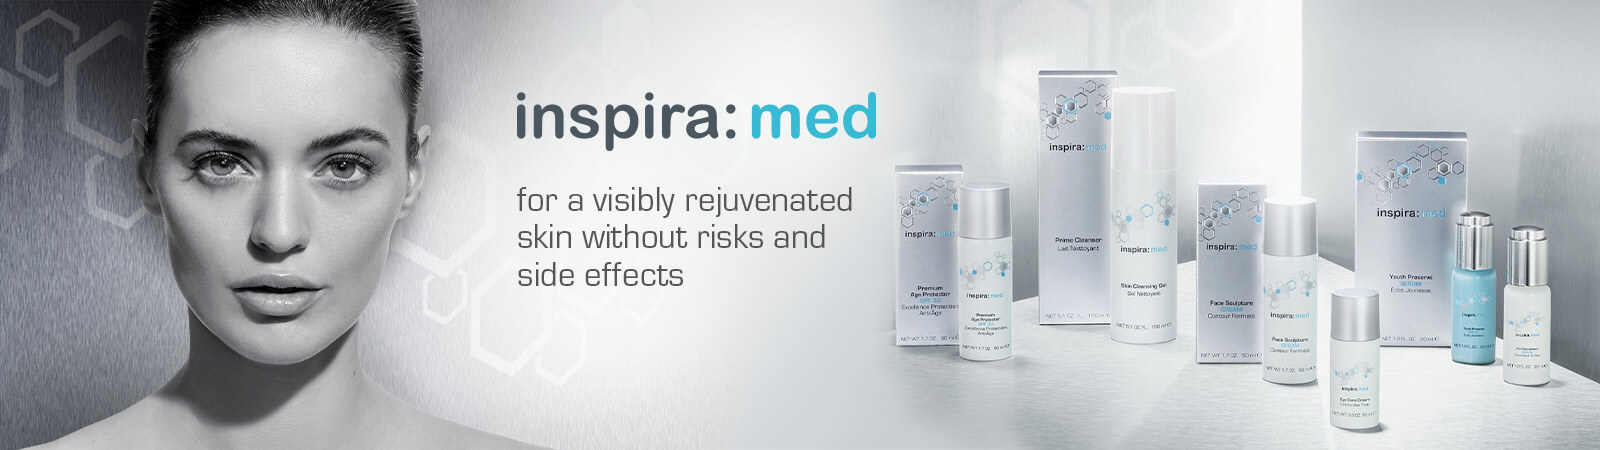 inspira-med-products